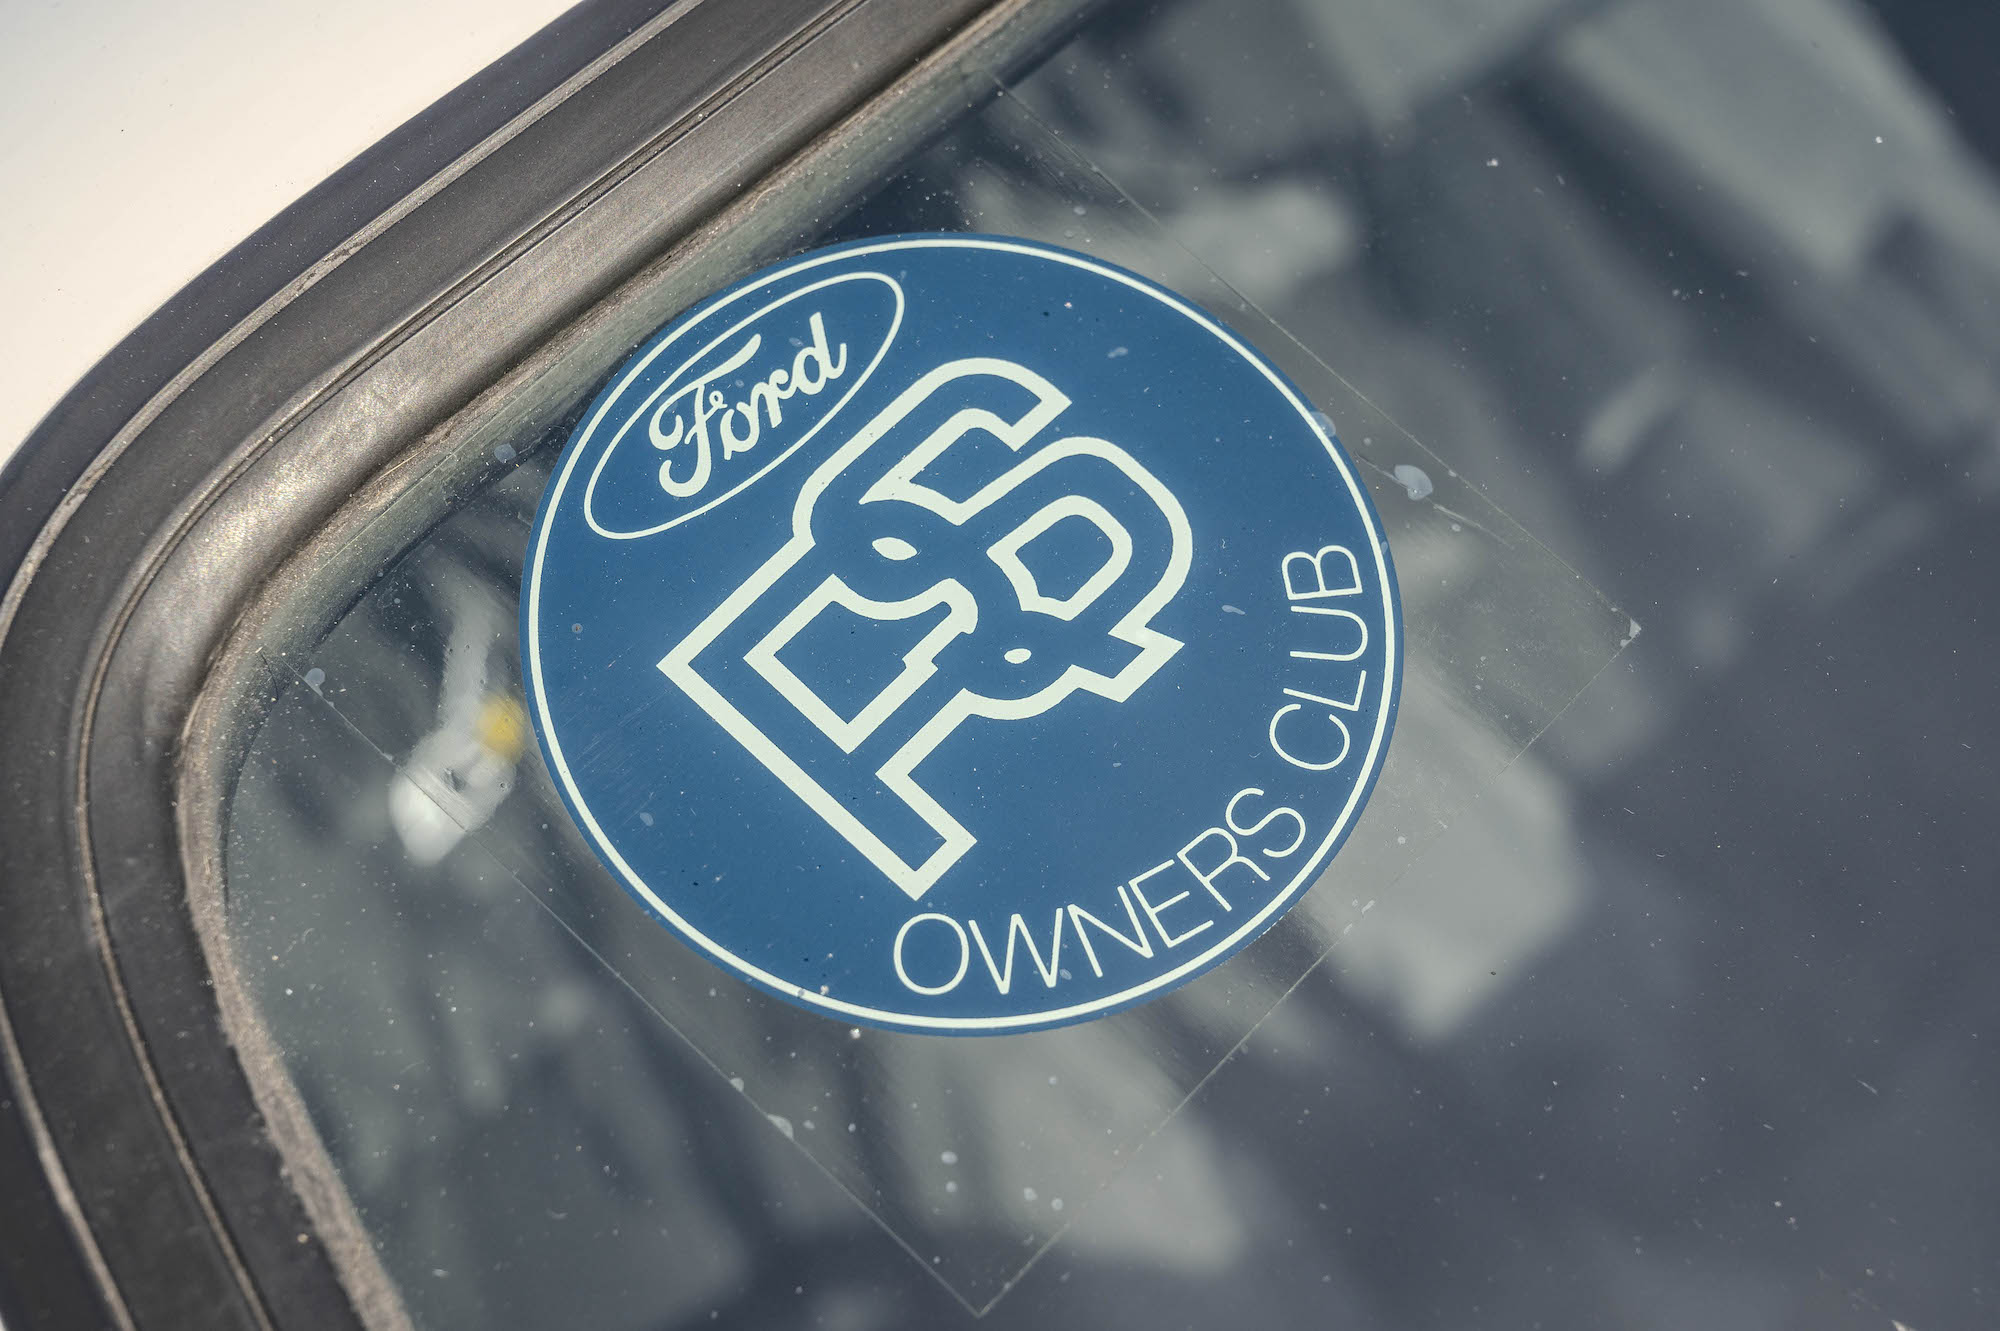 RS2000 Owners Club sticker